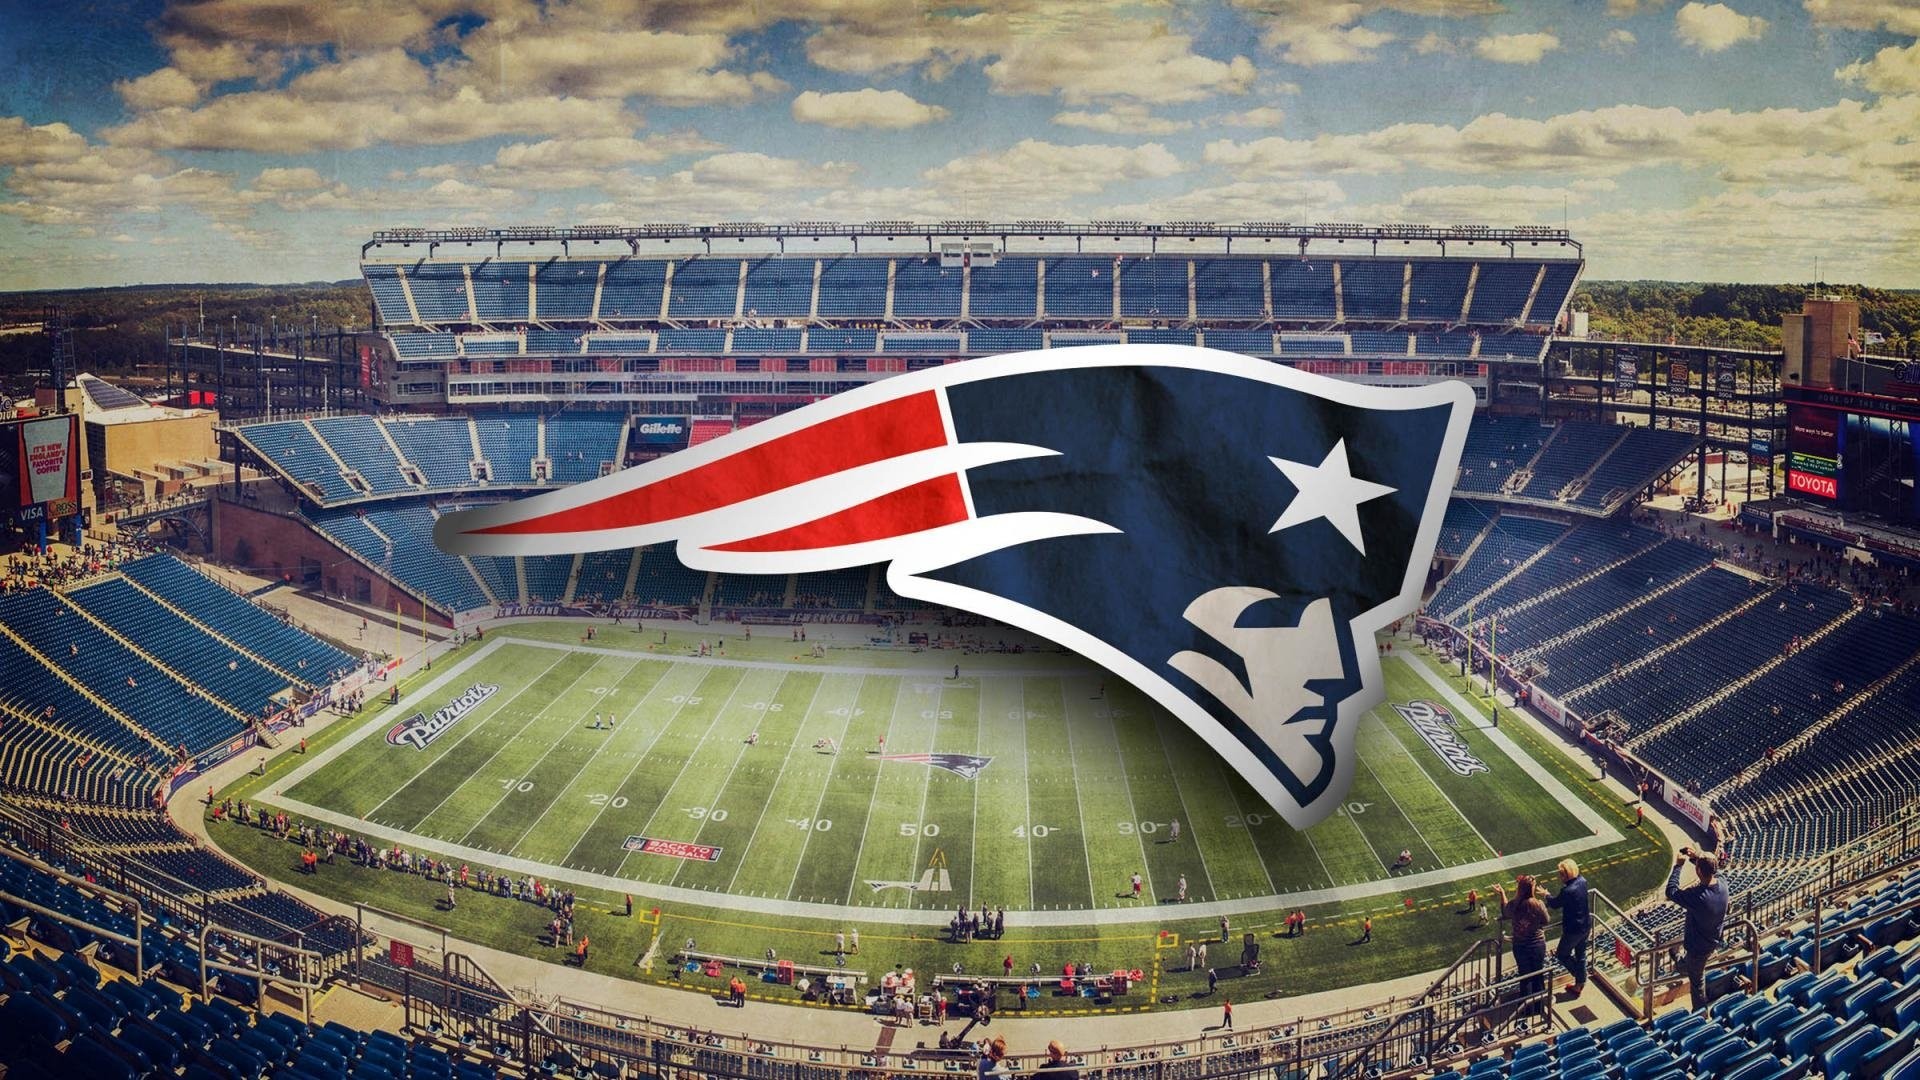 NE Patriots Desktop Wallpaper With Resolution 1920X1080 pixel. You can make this wallpaper for your Mac or Windows Desktop Background, iPhone, Android or Tablet and another Smartphone device for free